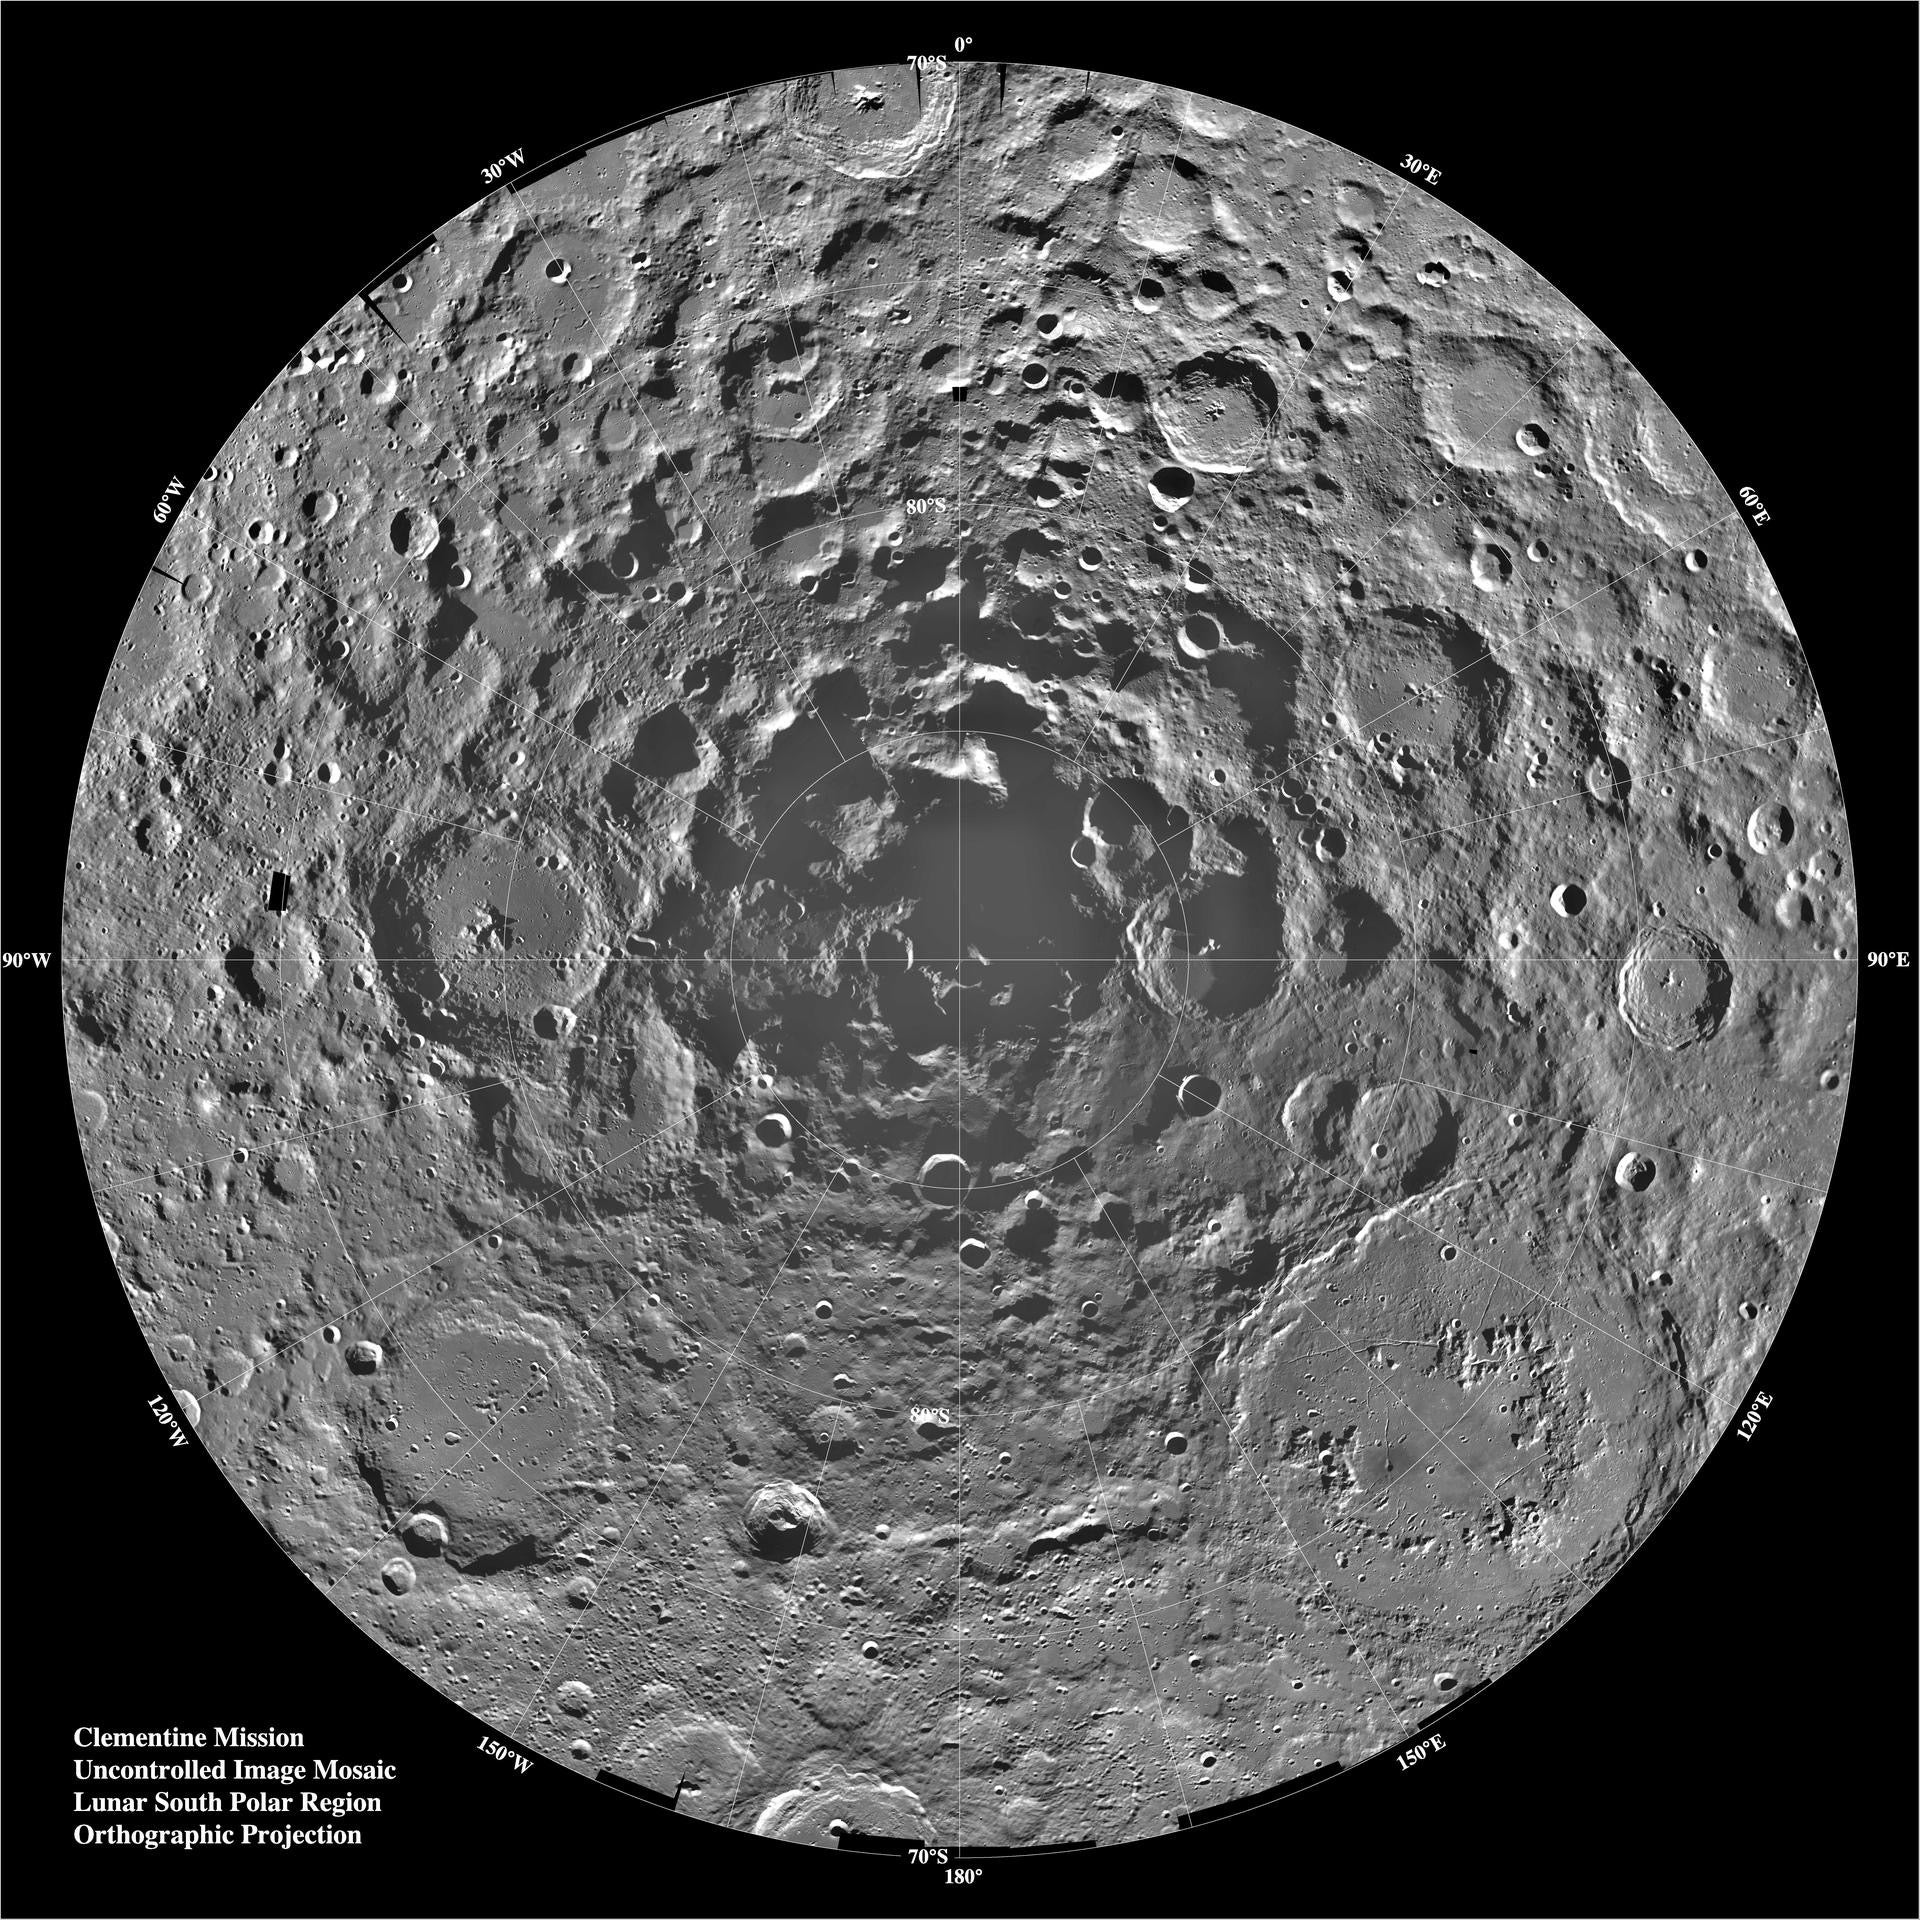 A lunar mosaic of 1,500 Clementine images of the south pole of the Moon. Credit: NASA.